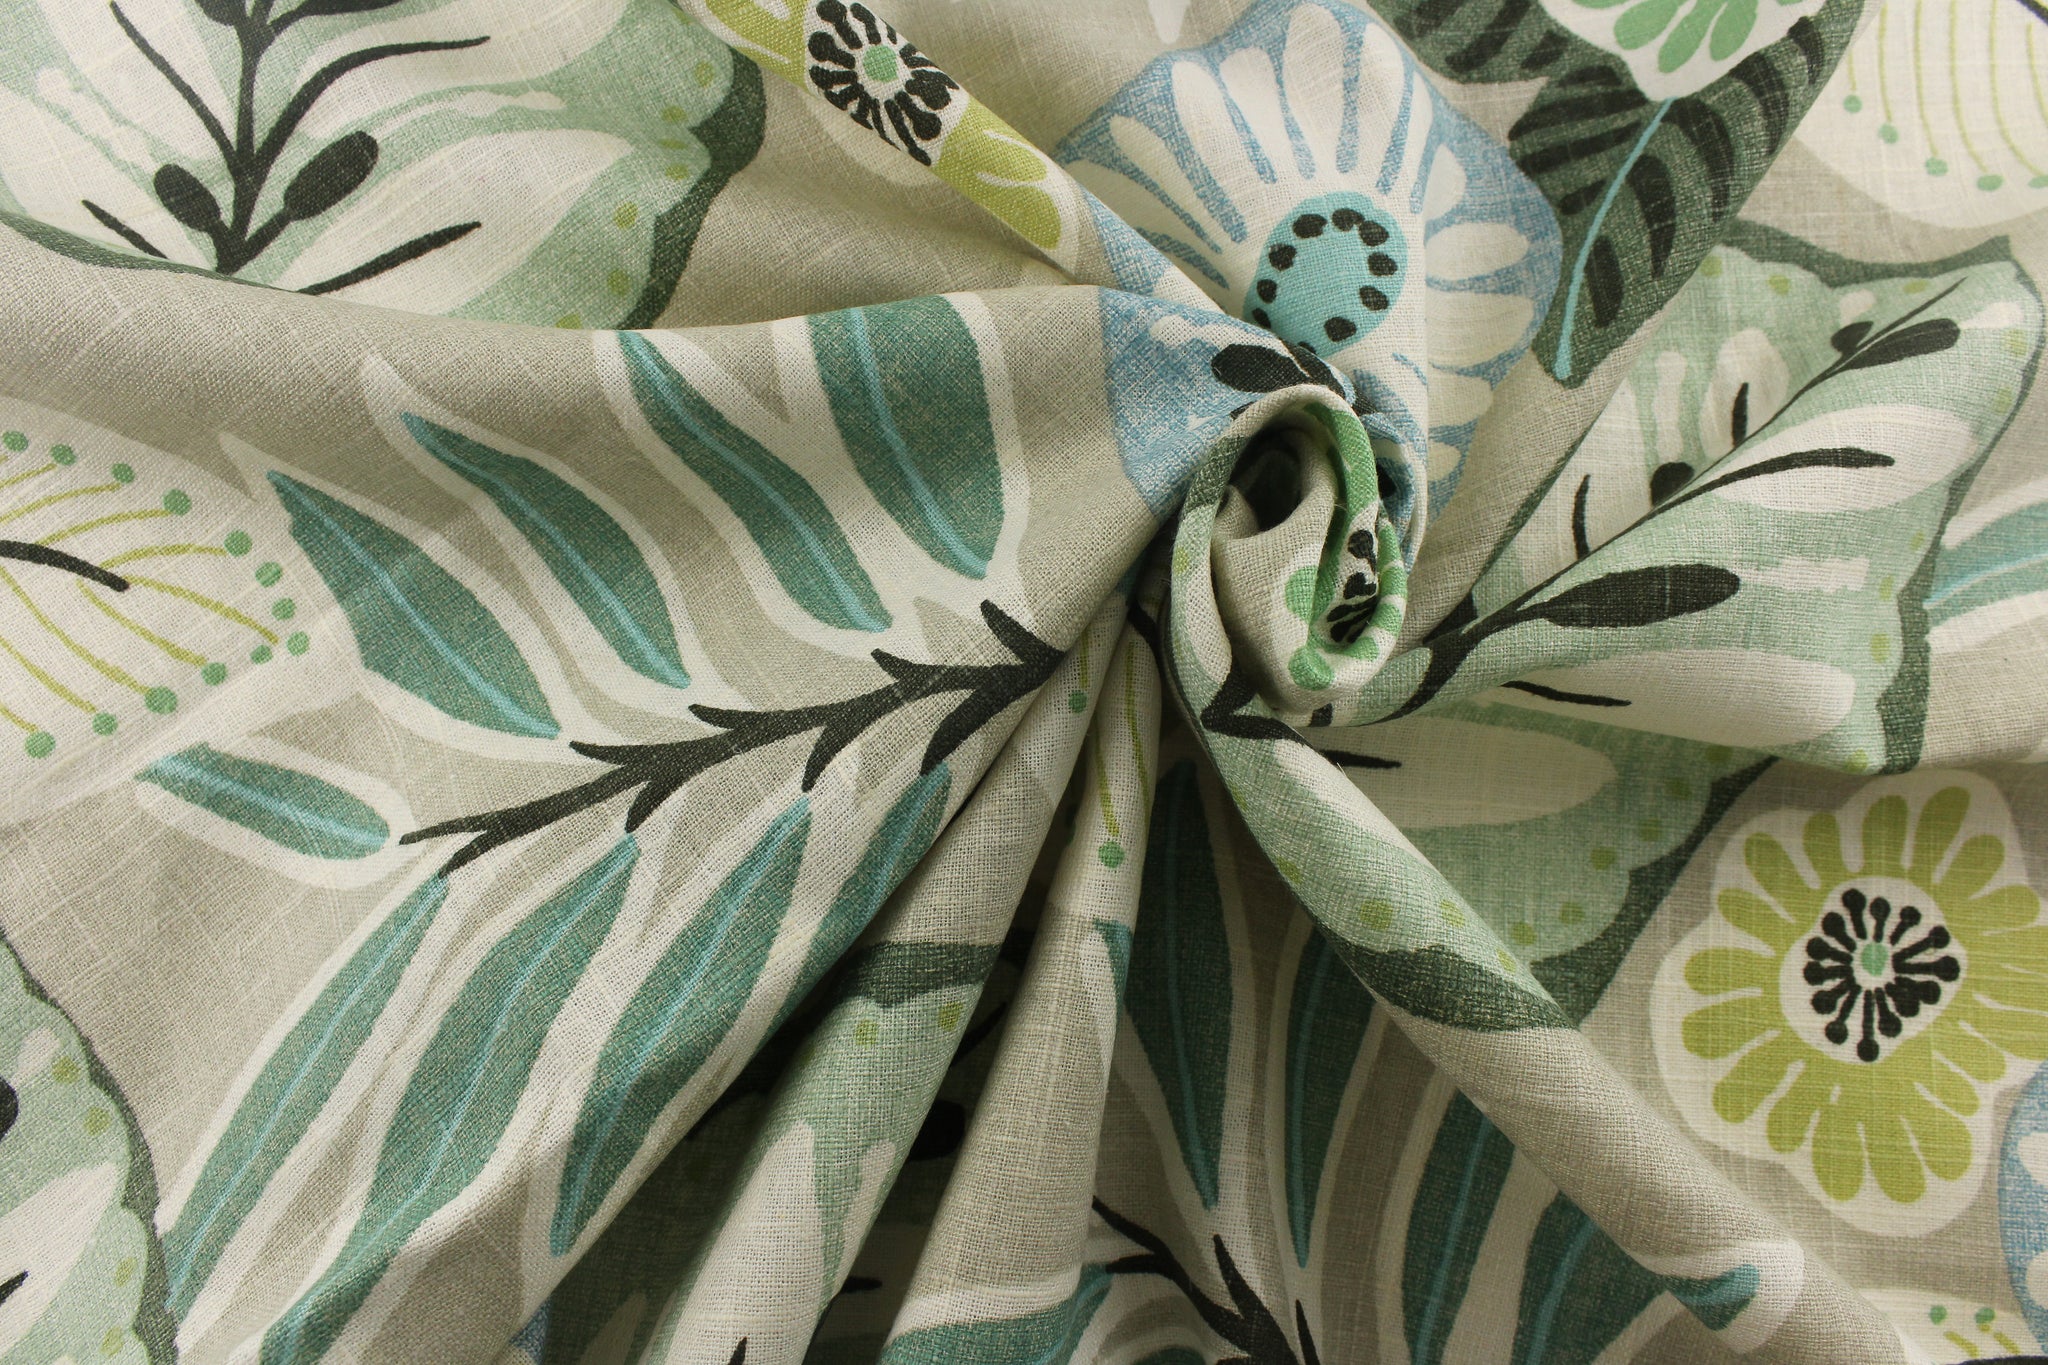 Tracey in Flora, Large Scale Floral in Citrus / Pink / Blue / Taupe, Richloom Home Decor / Drapery Fabric, Linen Blend, 54 Wide